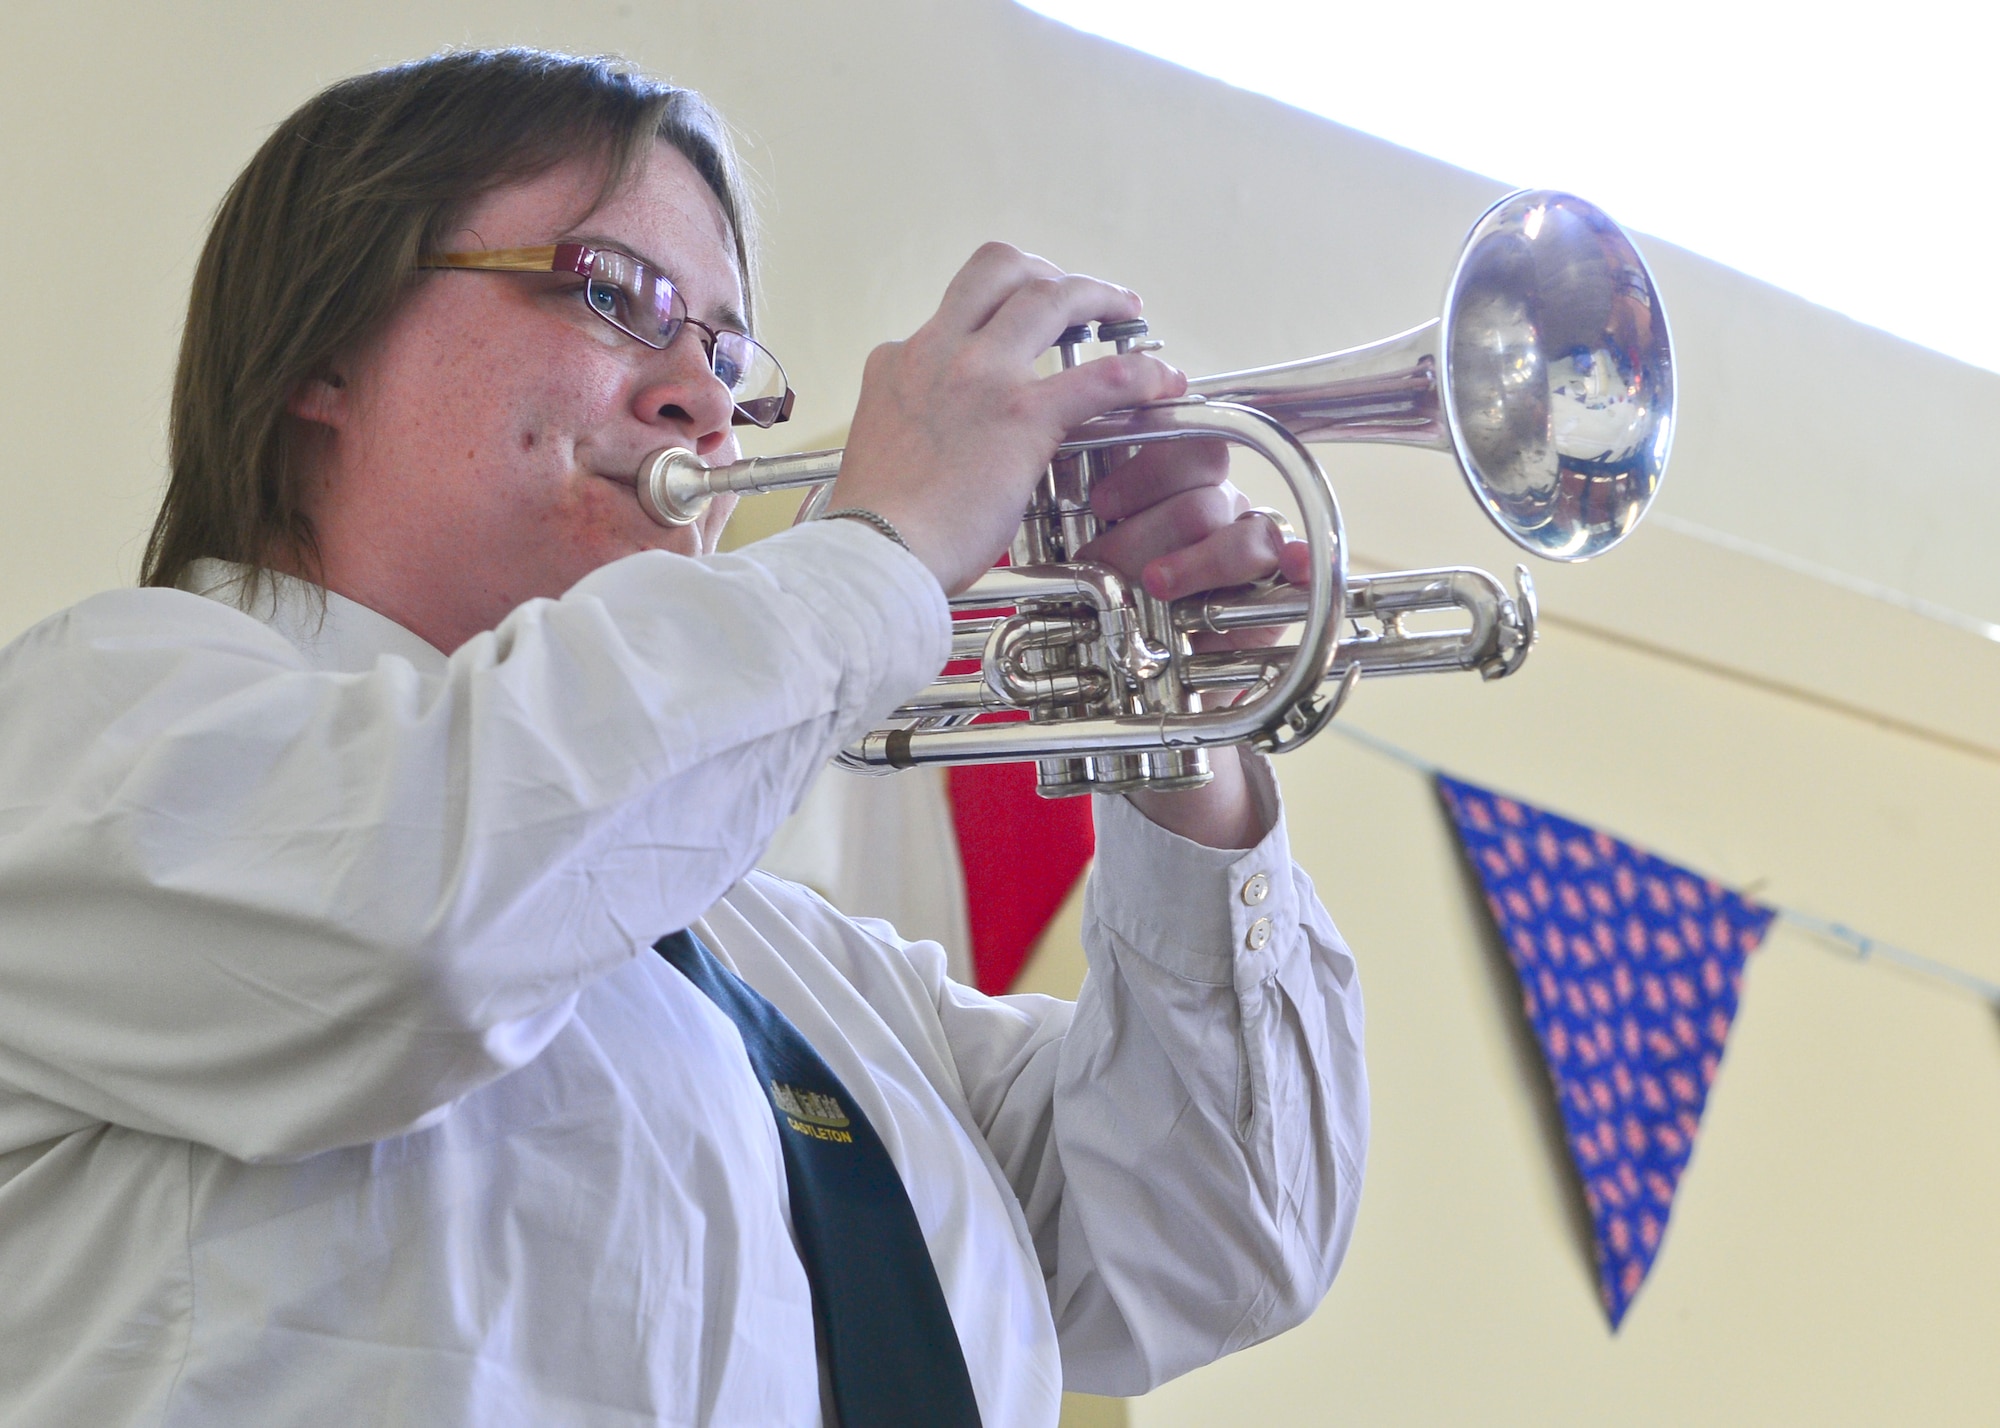 Taps is played following a remembrance ceremony for the 490th Bombardment Group in Eye, England, Aug. 9, 2015. Taps, unique to the U.S. military, is played at burial and memorial services, to accompany the lowering of the flag and to signal the “lights out” command at day’s end. (U.S. Air Force photo by Senior Airman Dawn M. Weber/Released)